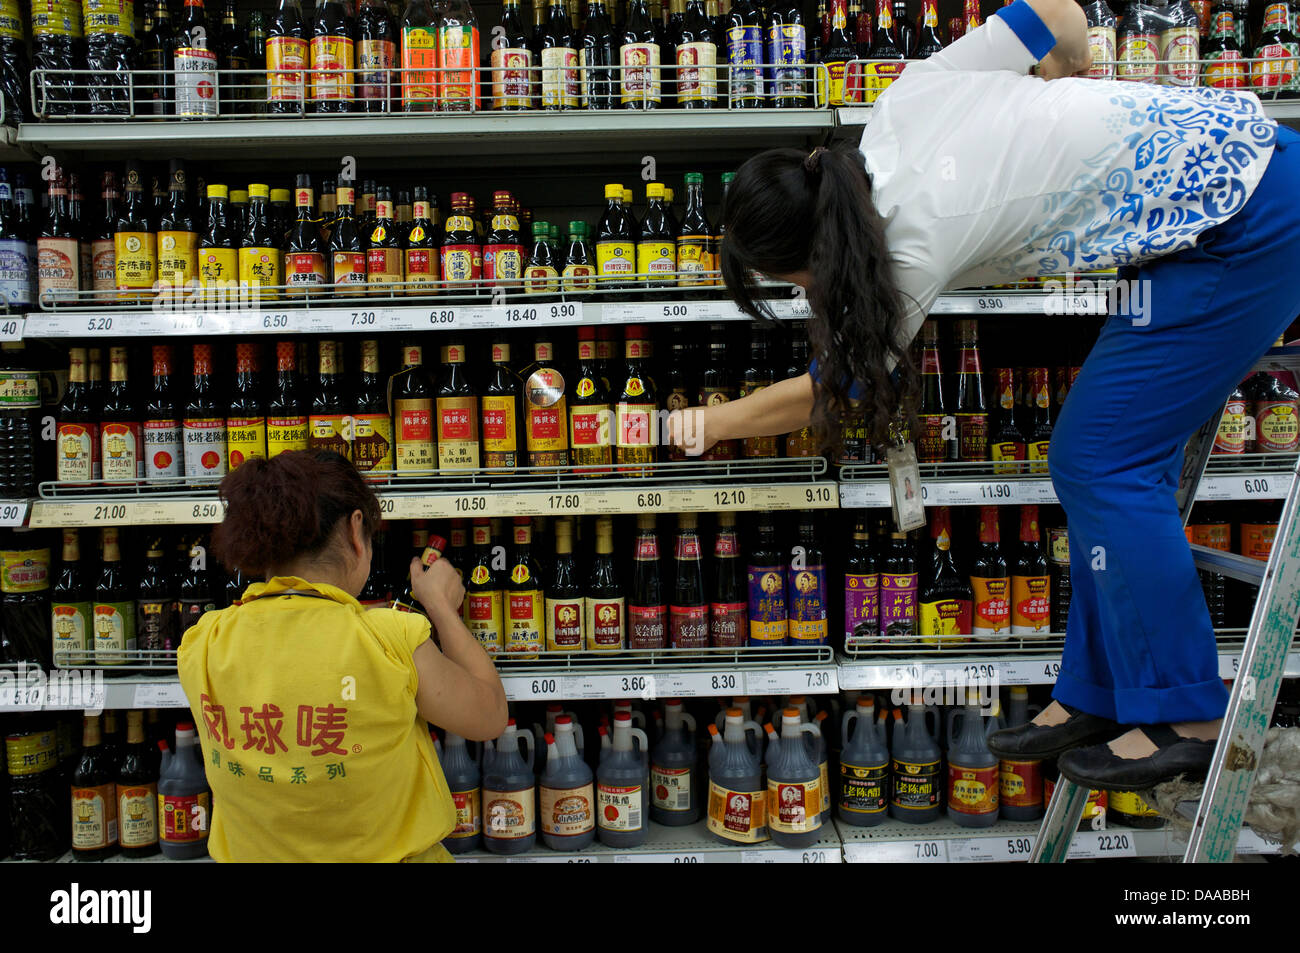 Bottled soy sauce and vinegar are on sale in a supermarket in Beijing, China. 09-Jul-2013 Stock Photo